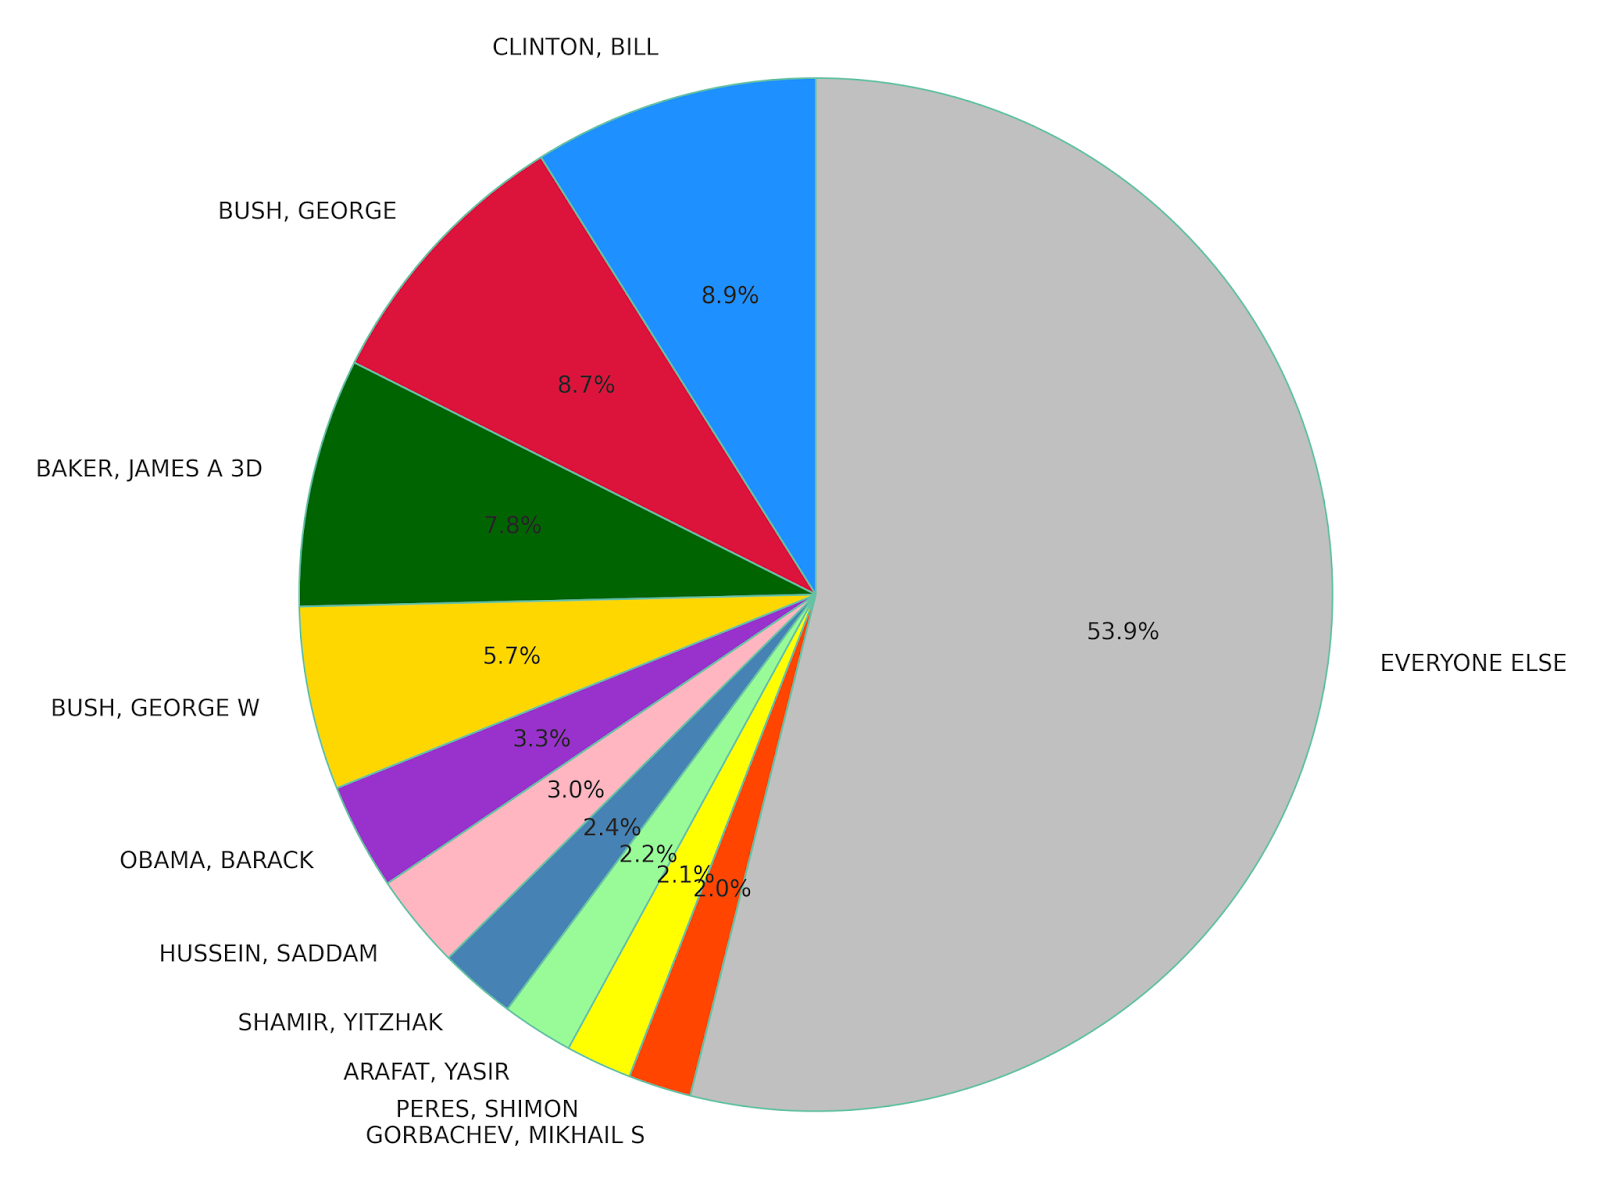 2013-10-20-person-counts-pie-chart.png